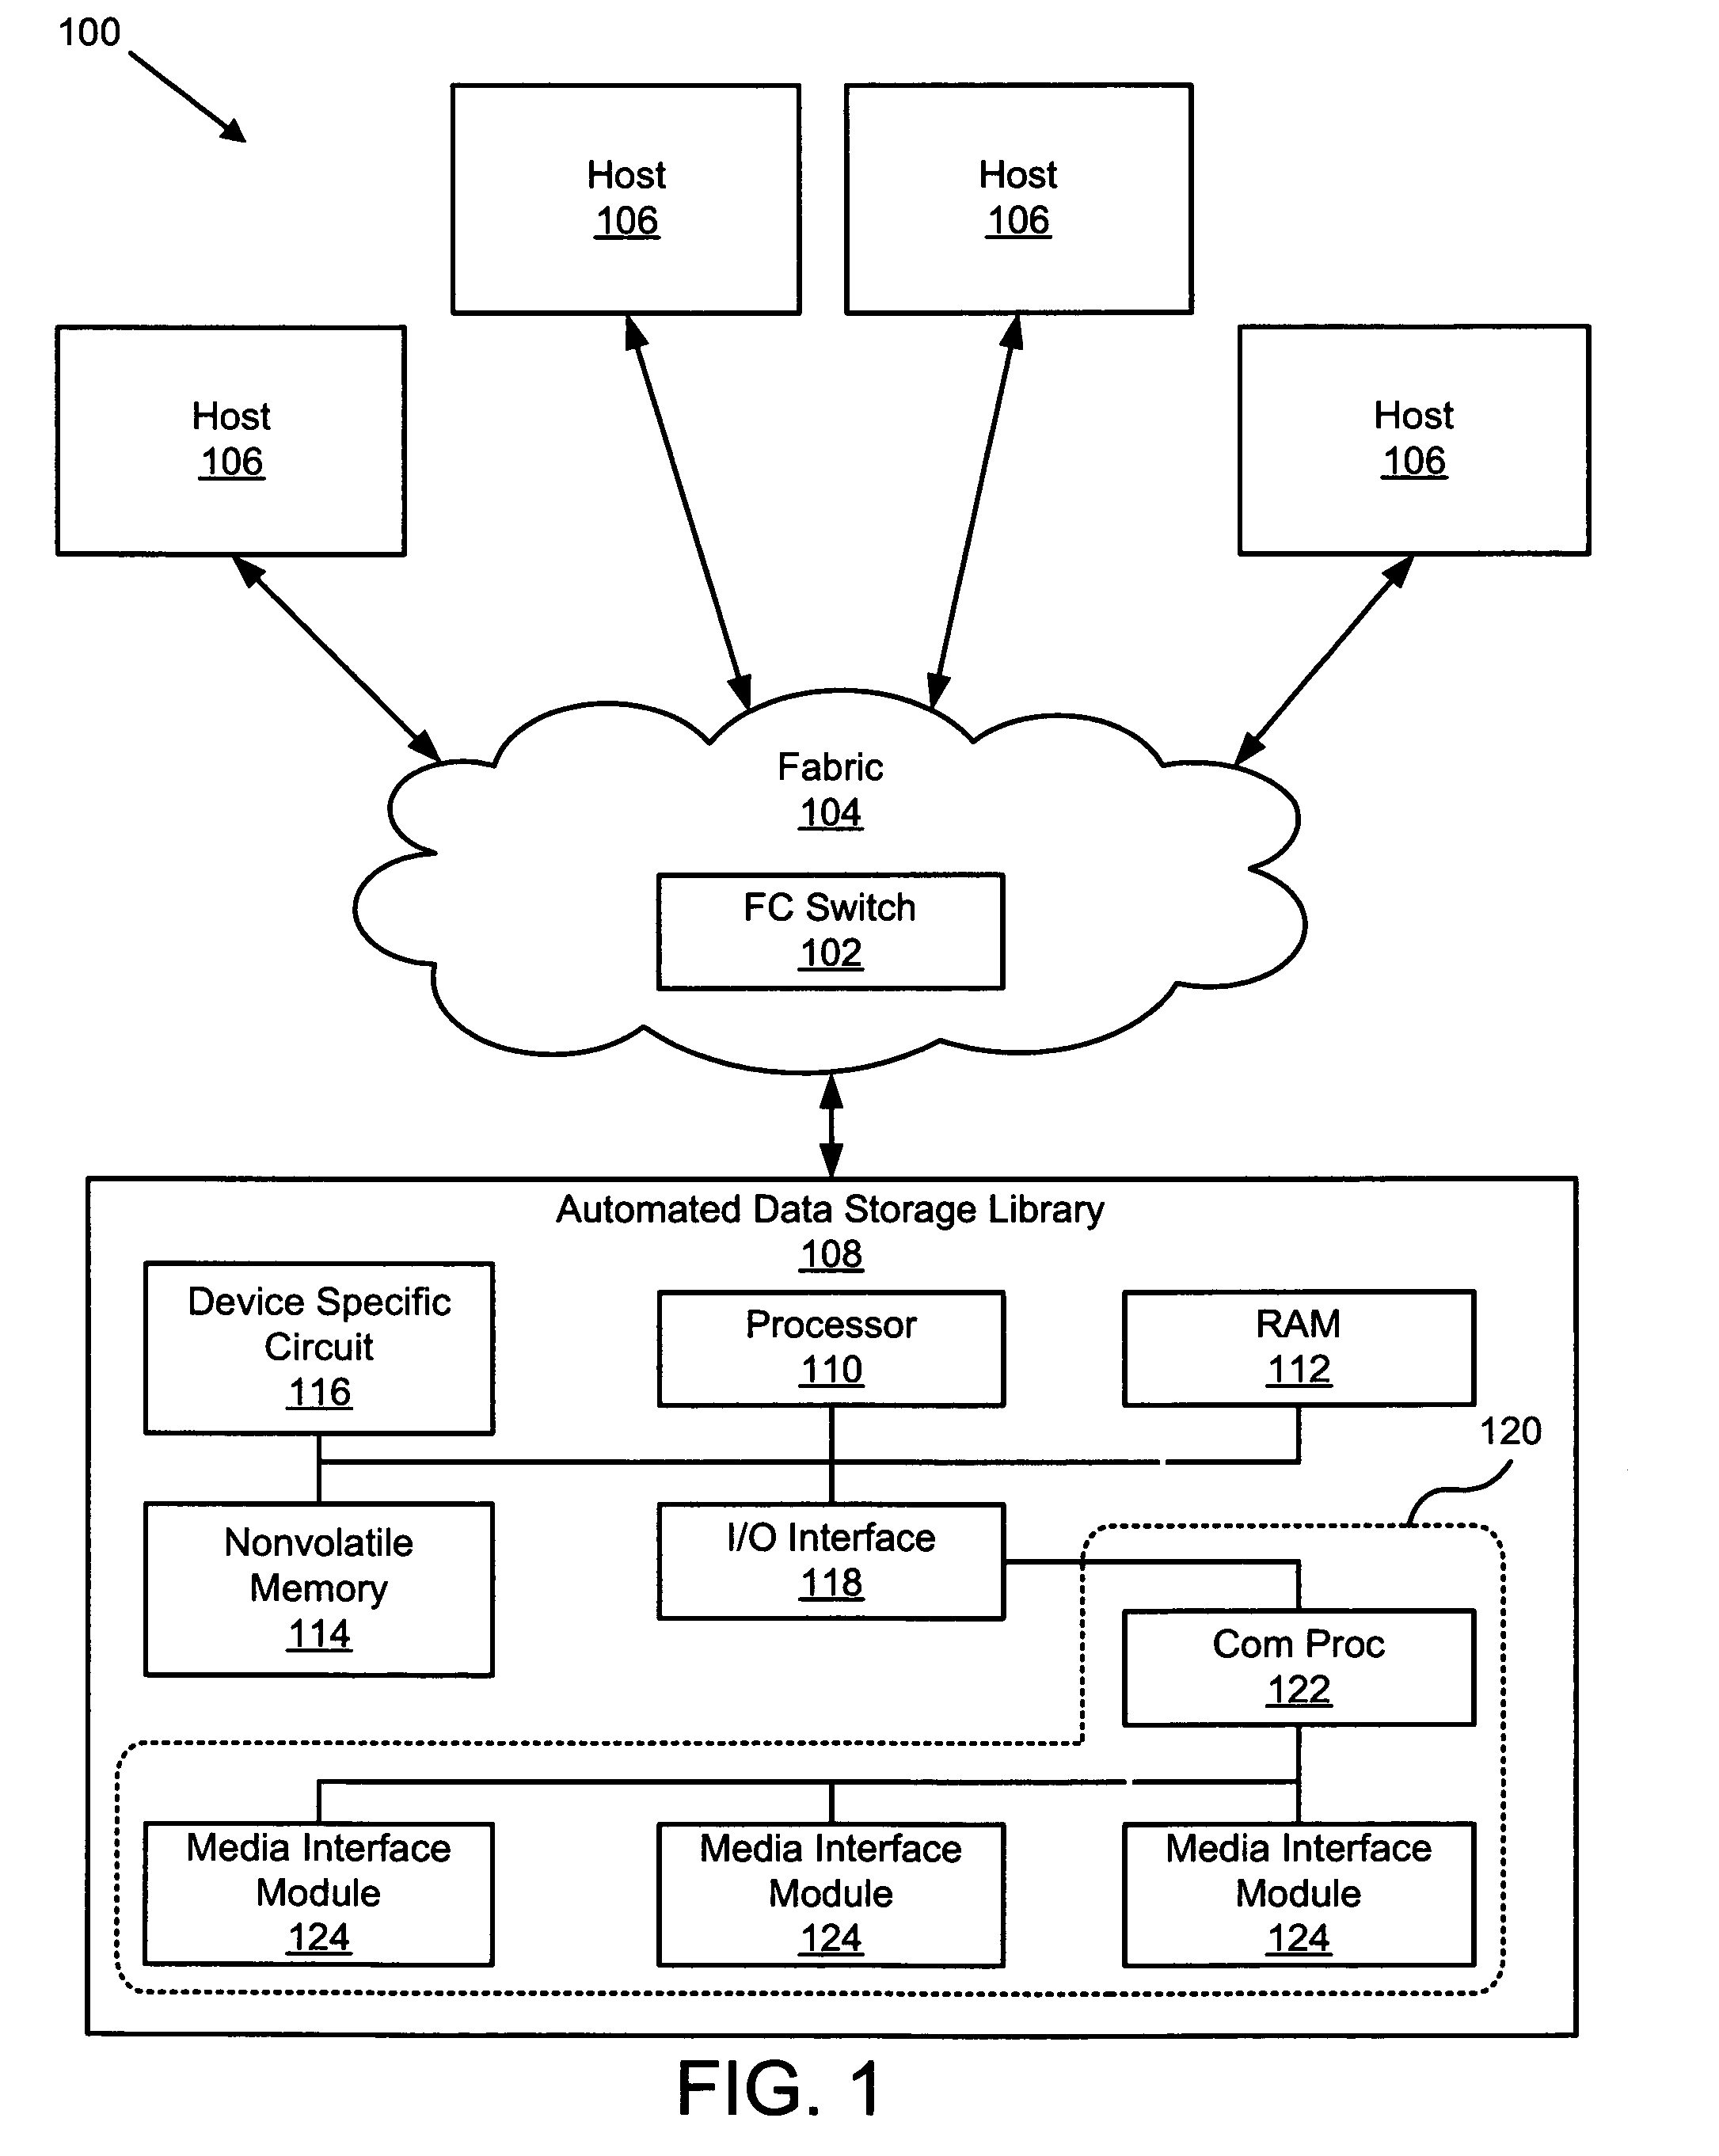 Apparatus, system, and method for quick access grid bus connection of storage cells in automated storage libraries